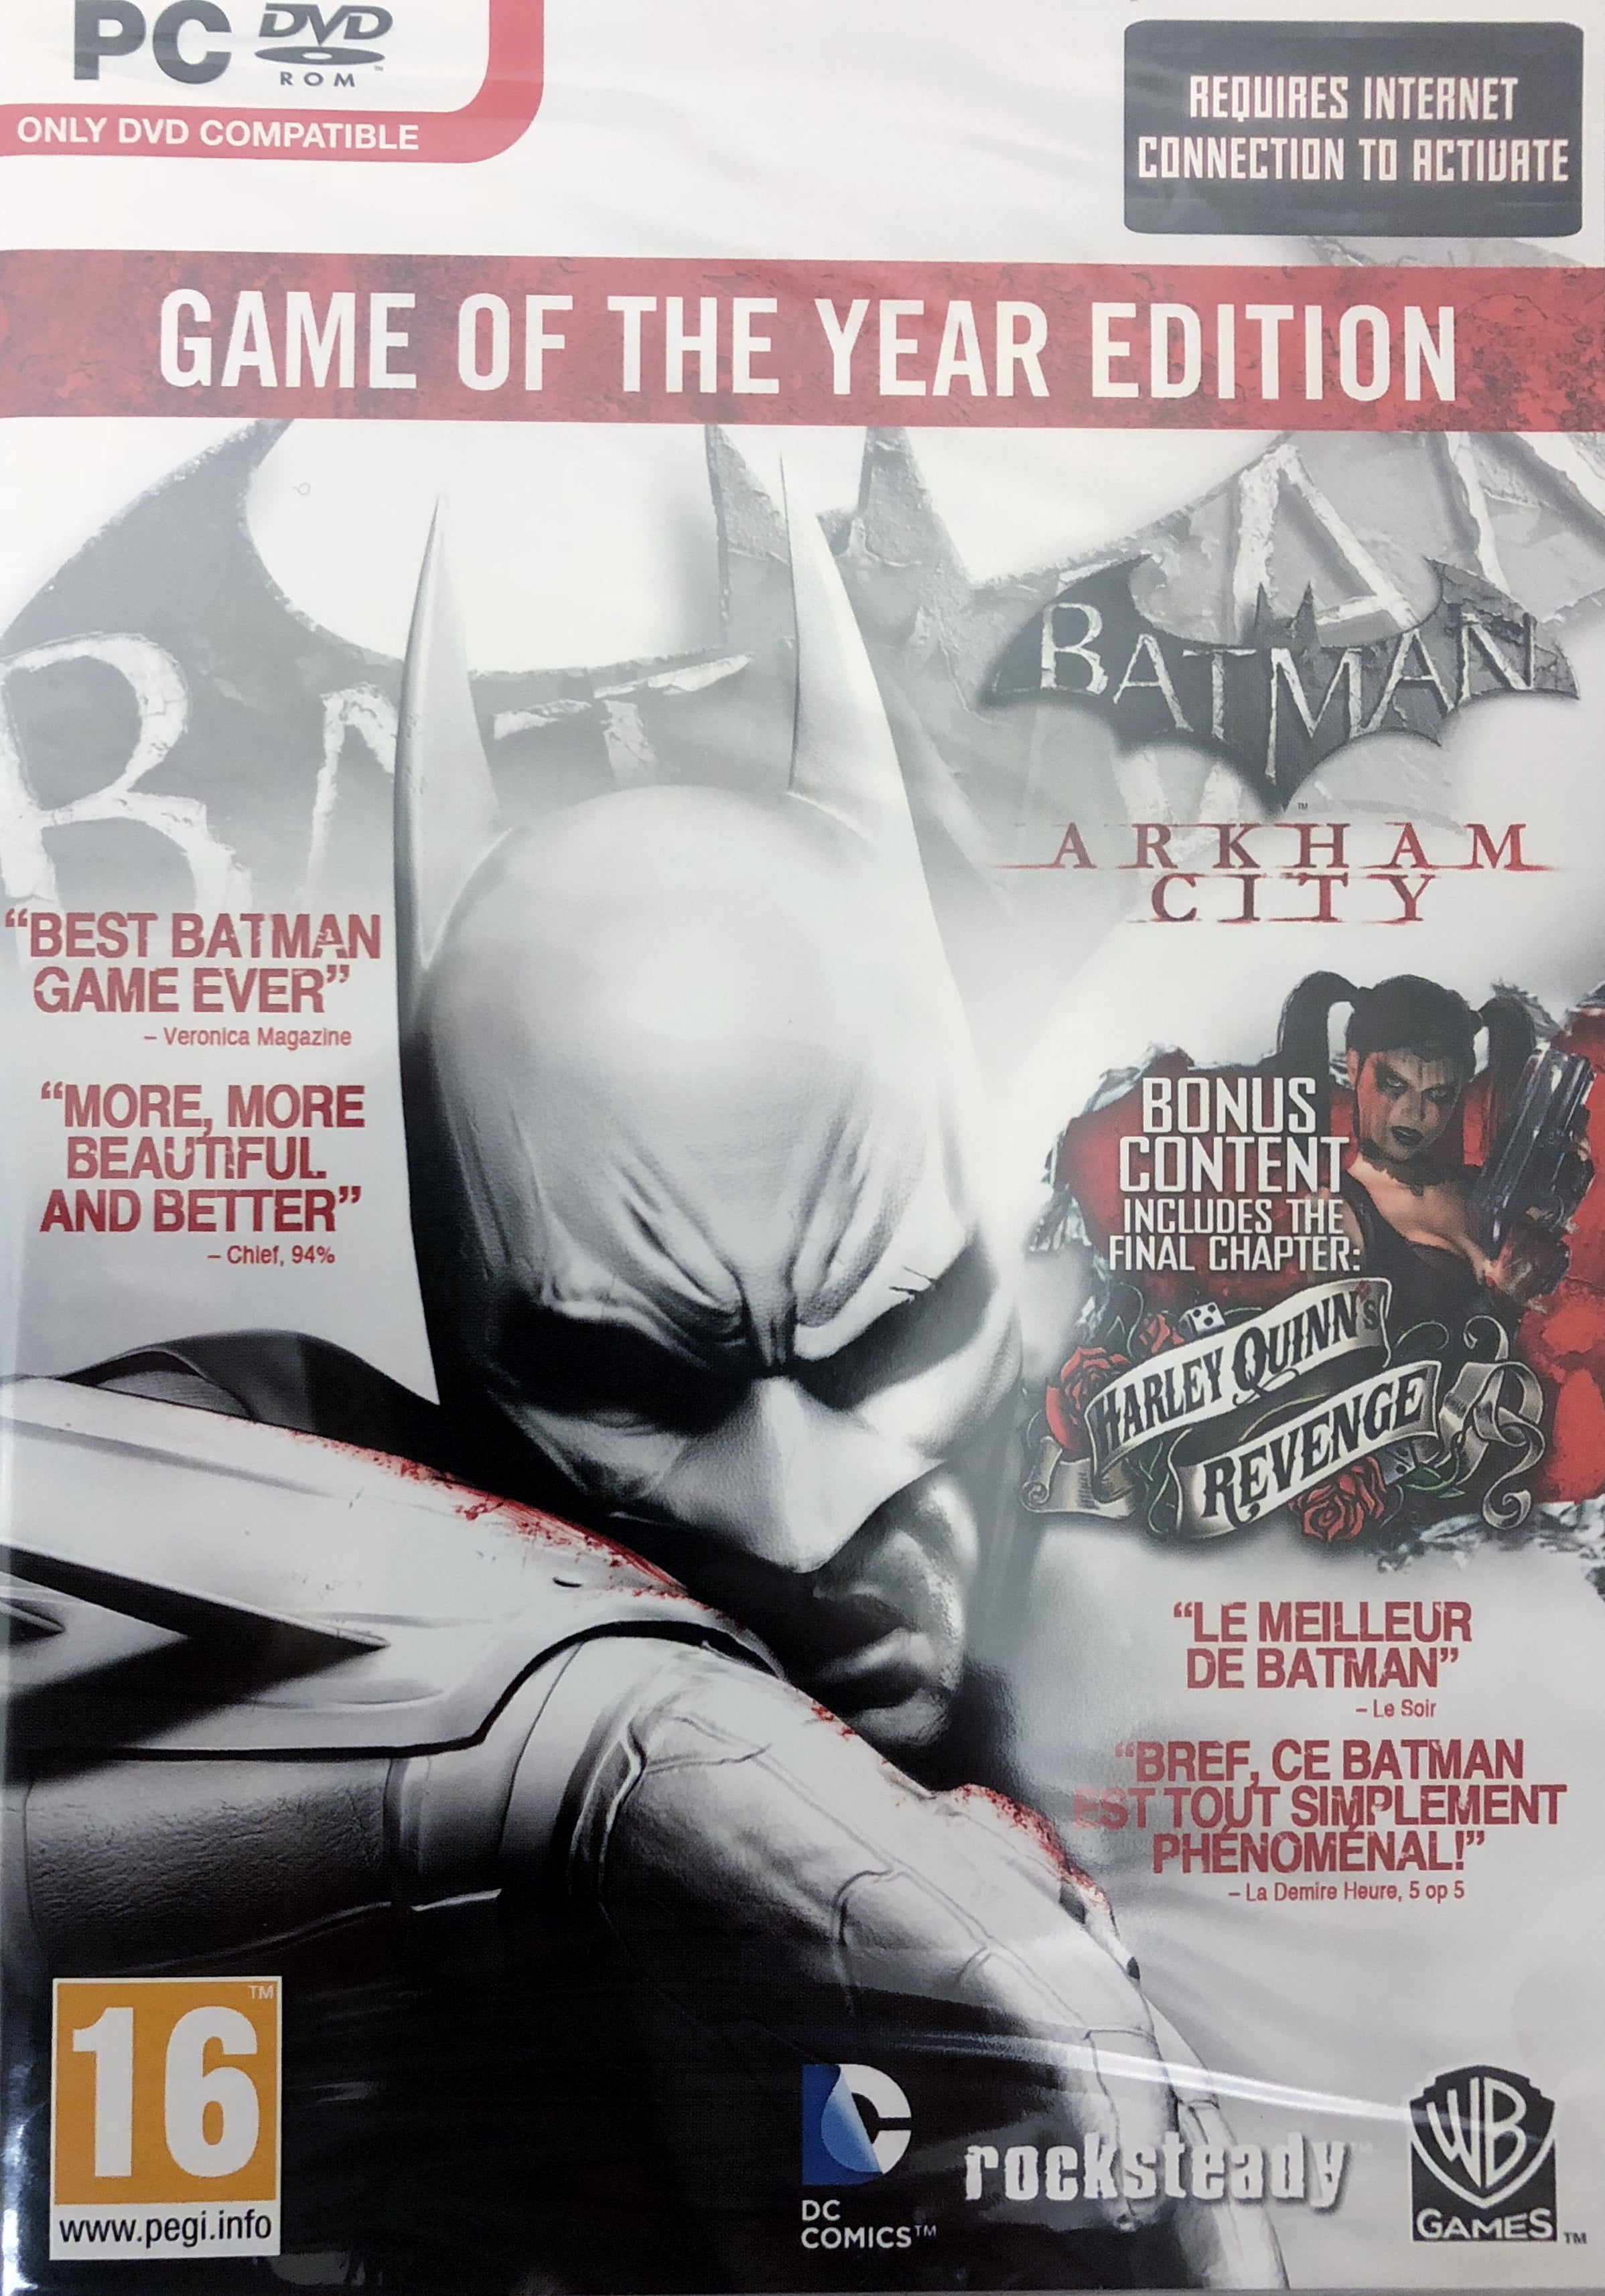 Batman: Arkham City Game of the Year Edition PC DVD-Rom 